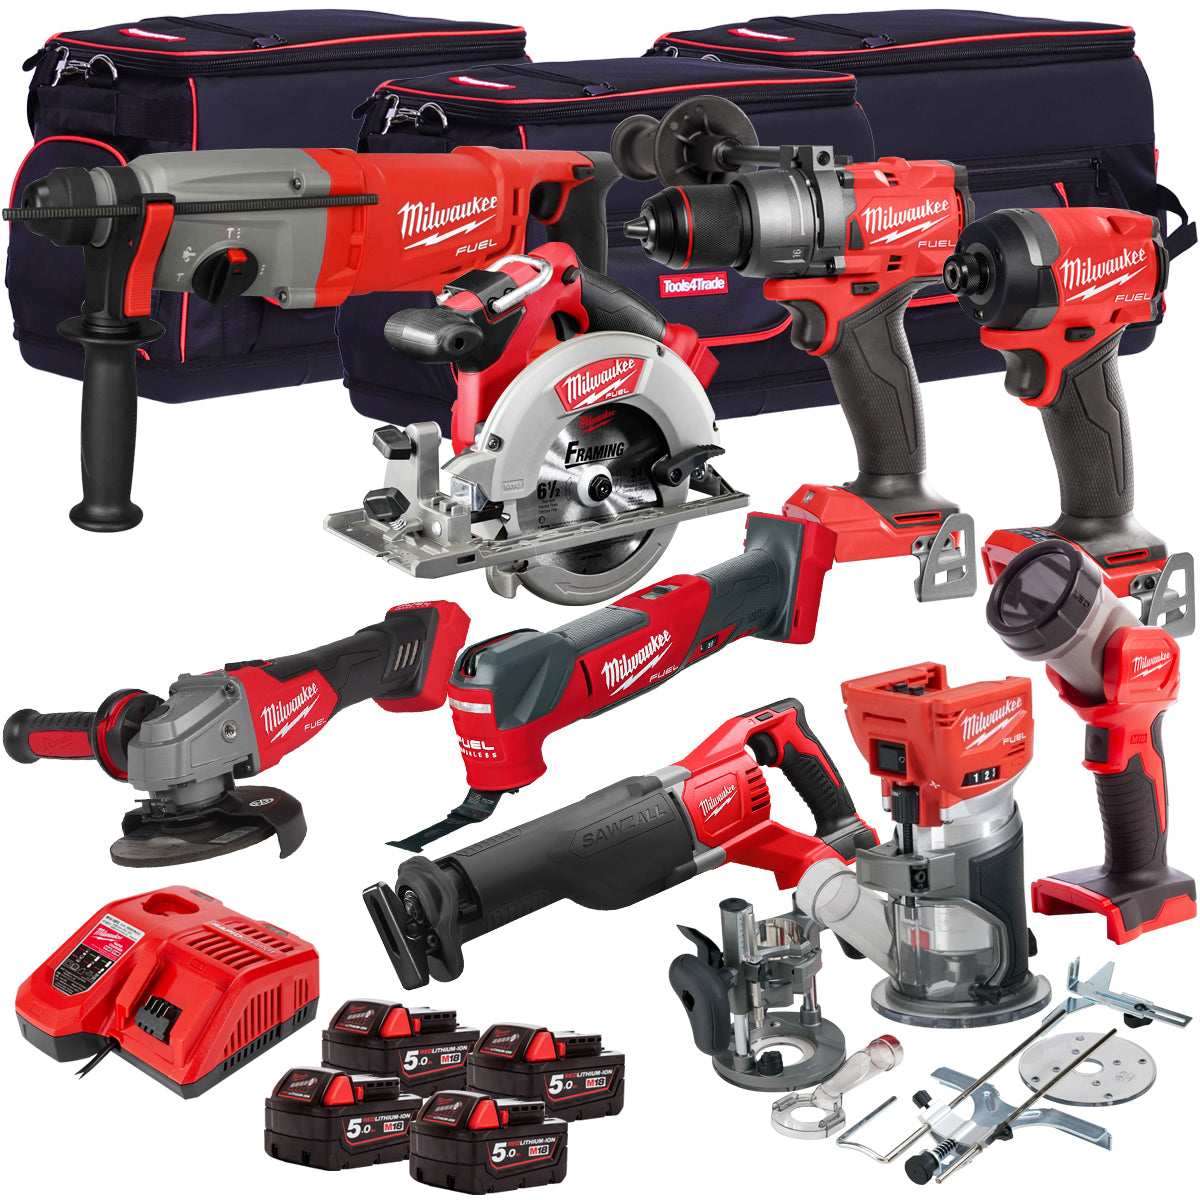 Milwaukee 18V Cordless 9 Piece Tool Kit with 4 x 5.0Ah Batteries & Charger in Bag T4TM-6